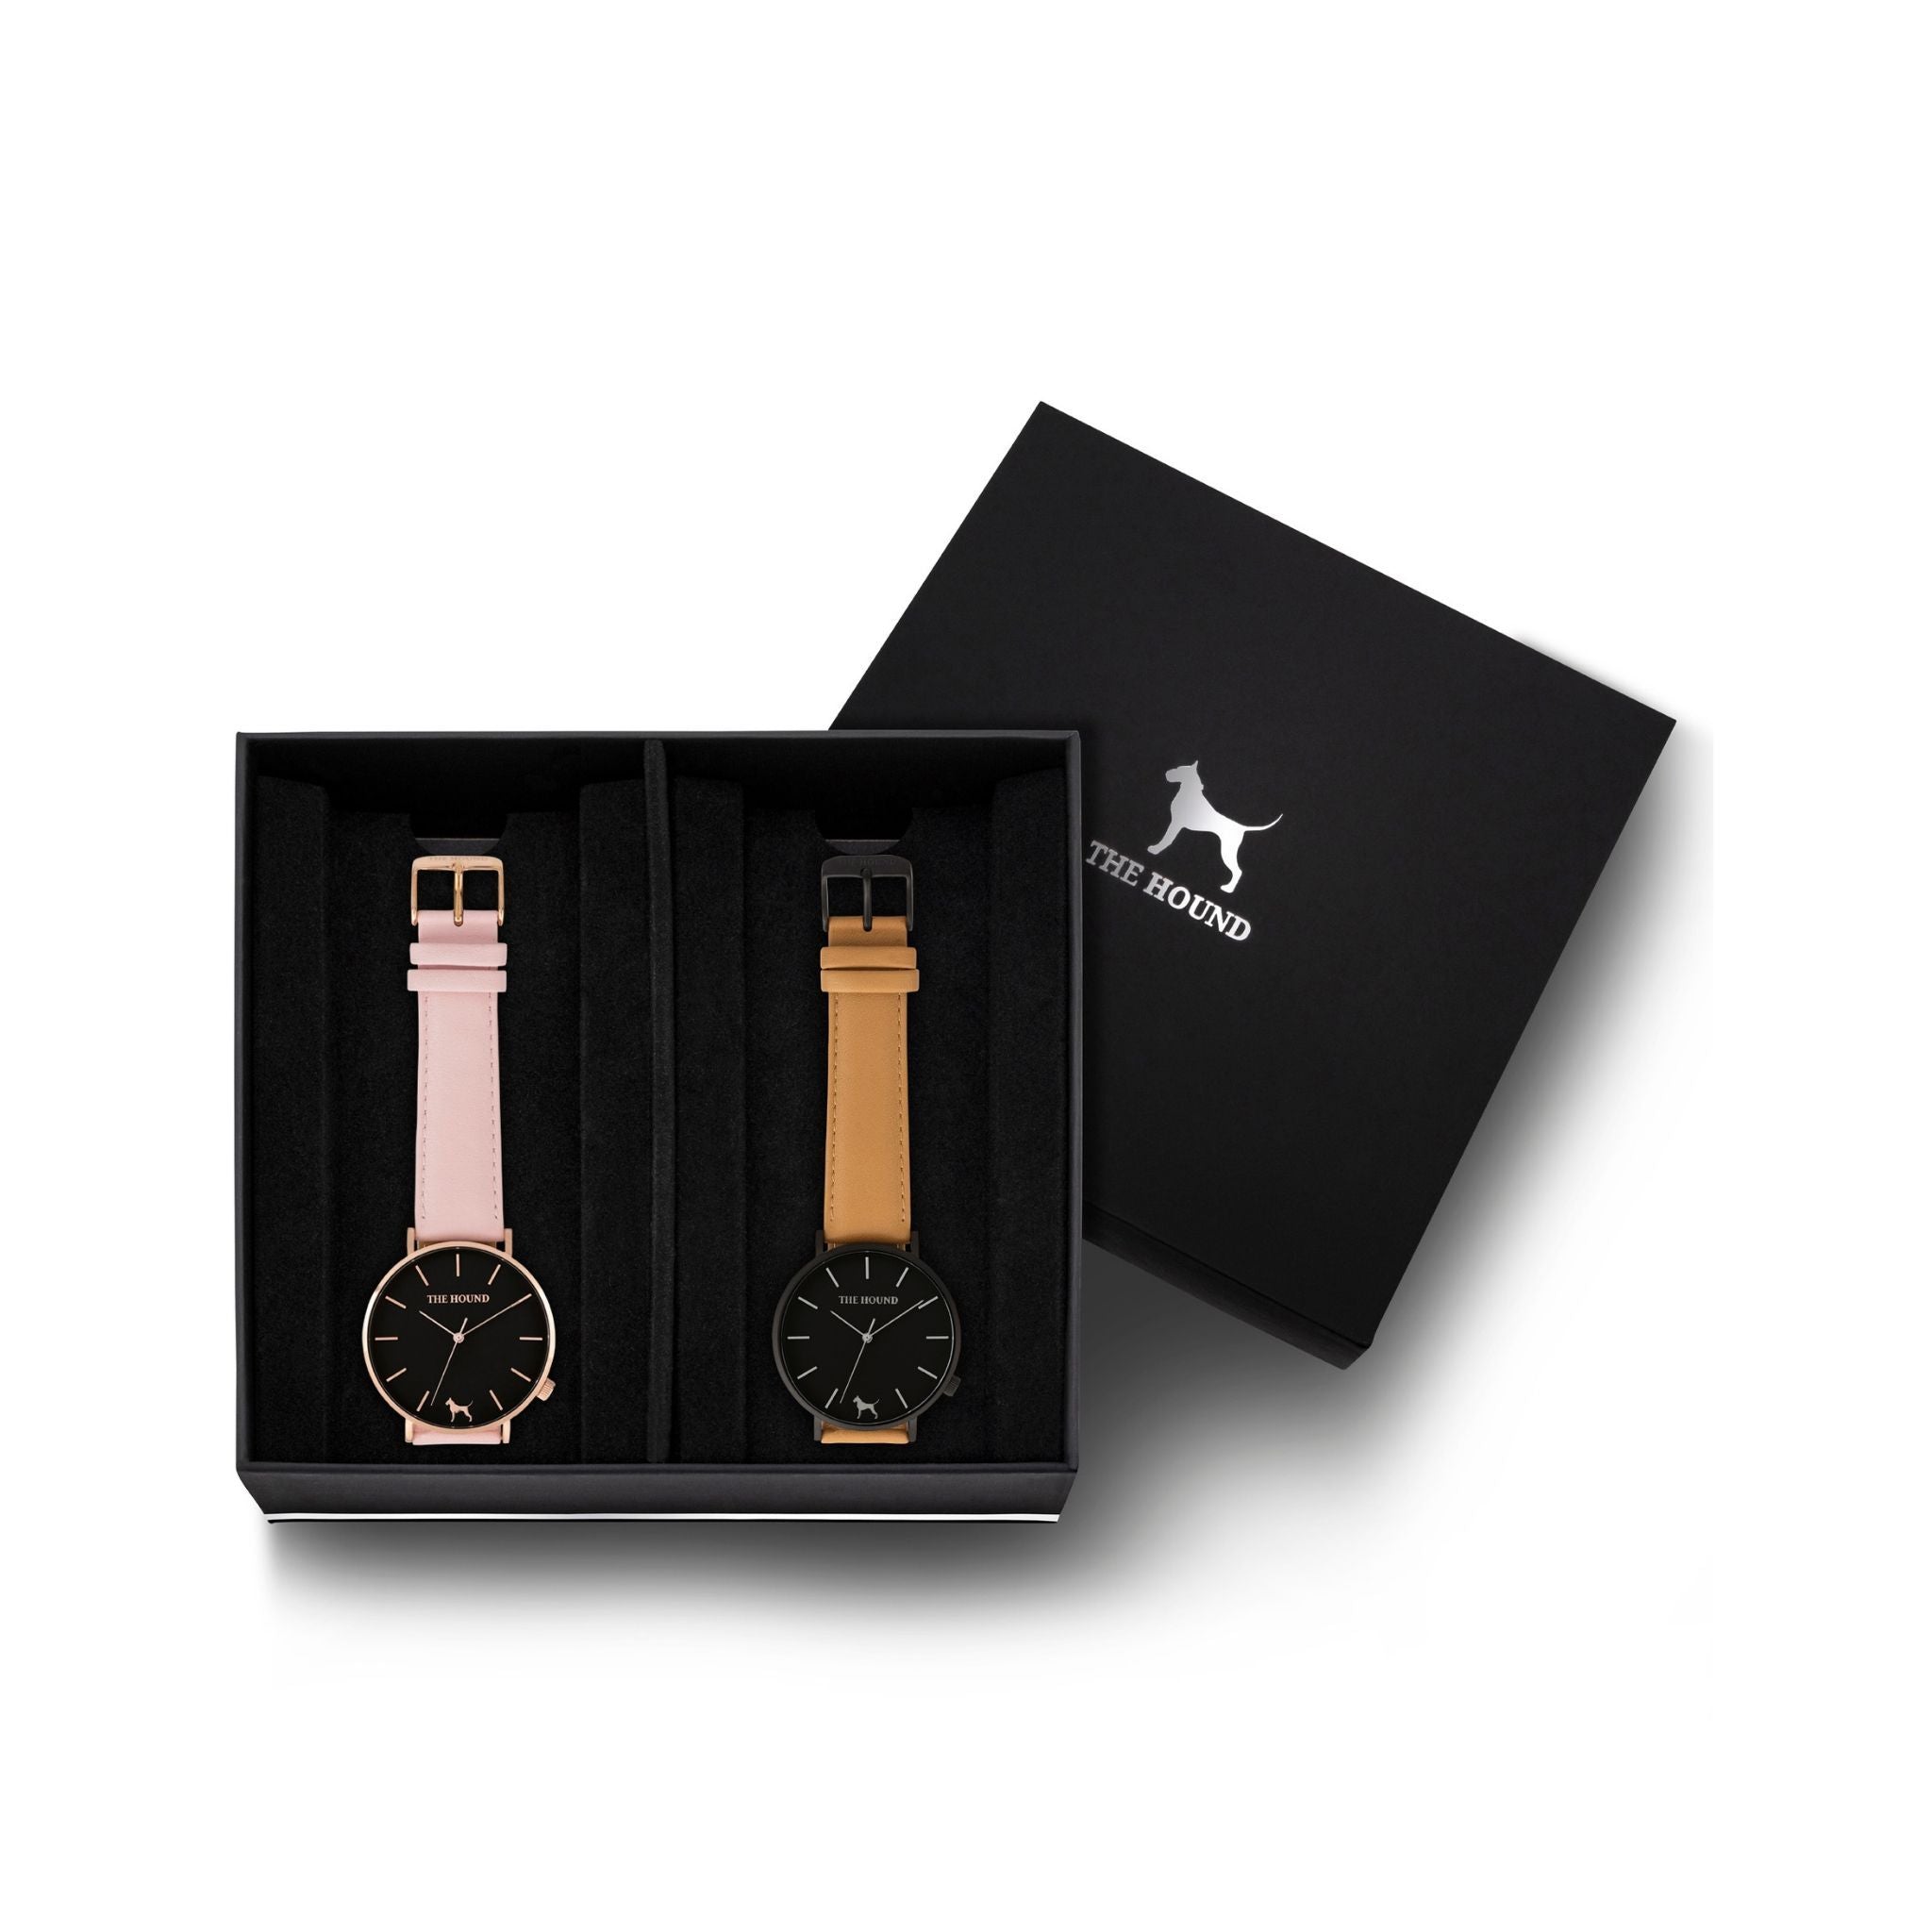 Custom gift set - Rose gold and black watch with stitched blush pink genuine leather band and a matte black and black watch with stitched camel genuine leather band